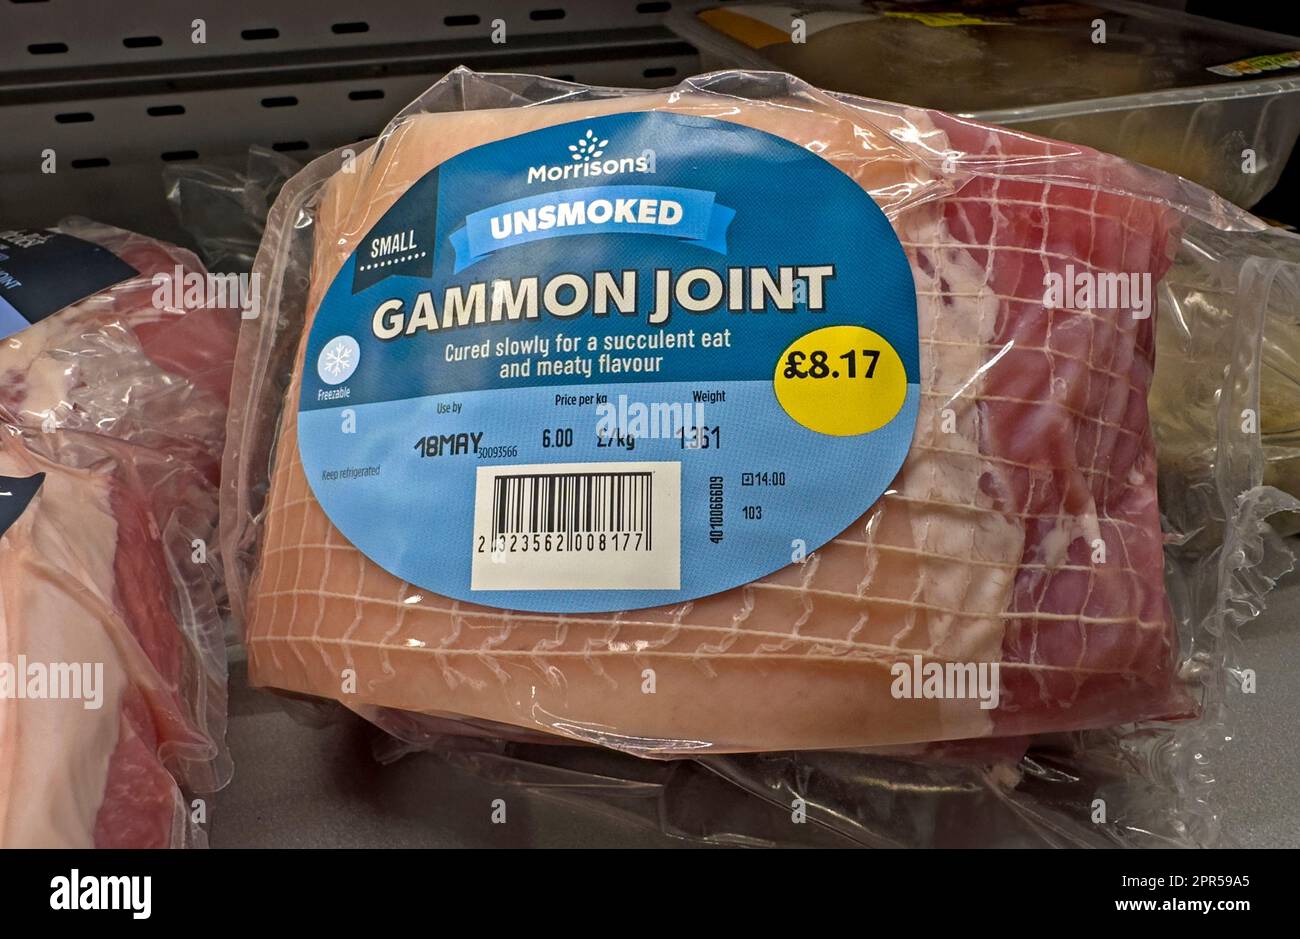 Unsmoked cured gammon joint at Morrisons supermarket, British food retailer competing with discounters, England, UK Stock Photo